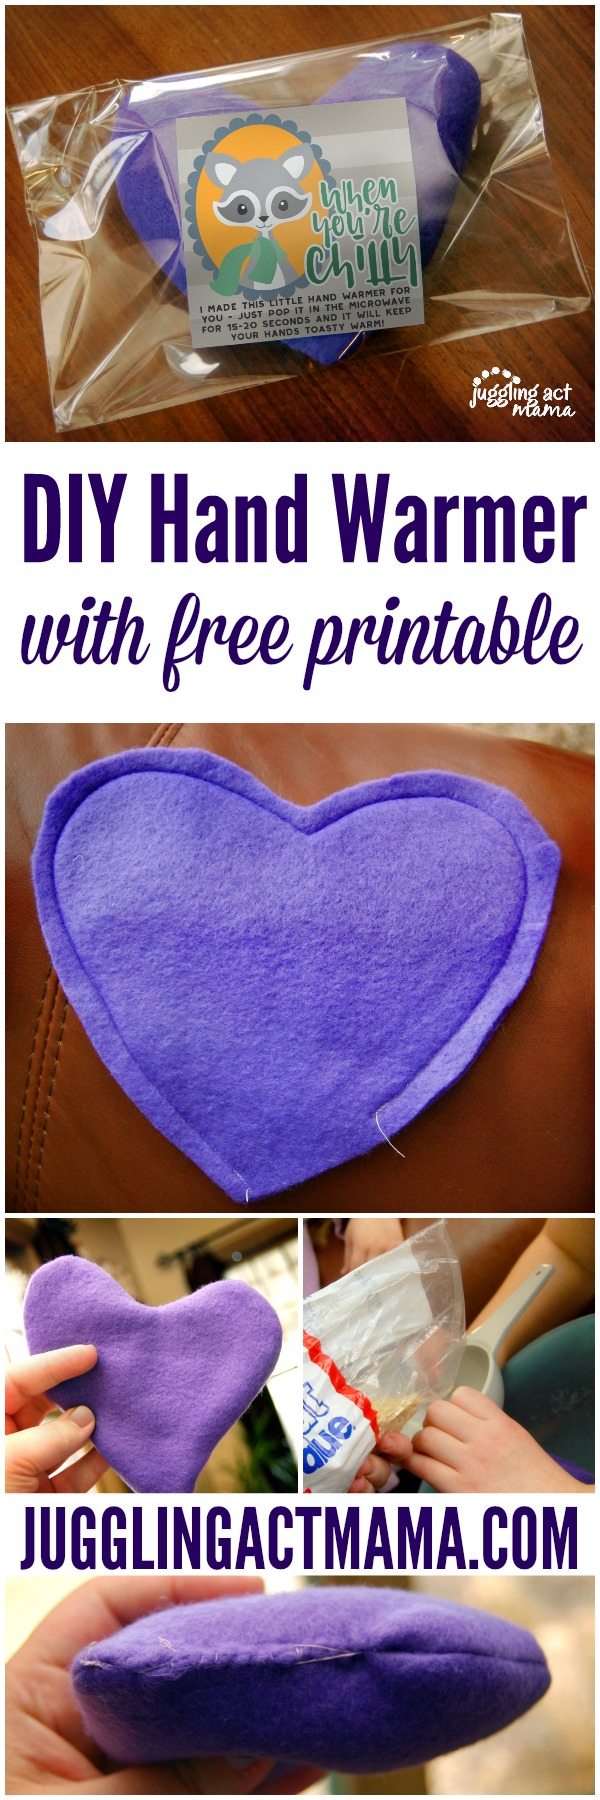 DIY Hand Warmers for Kids with free printable for gifting